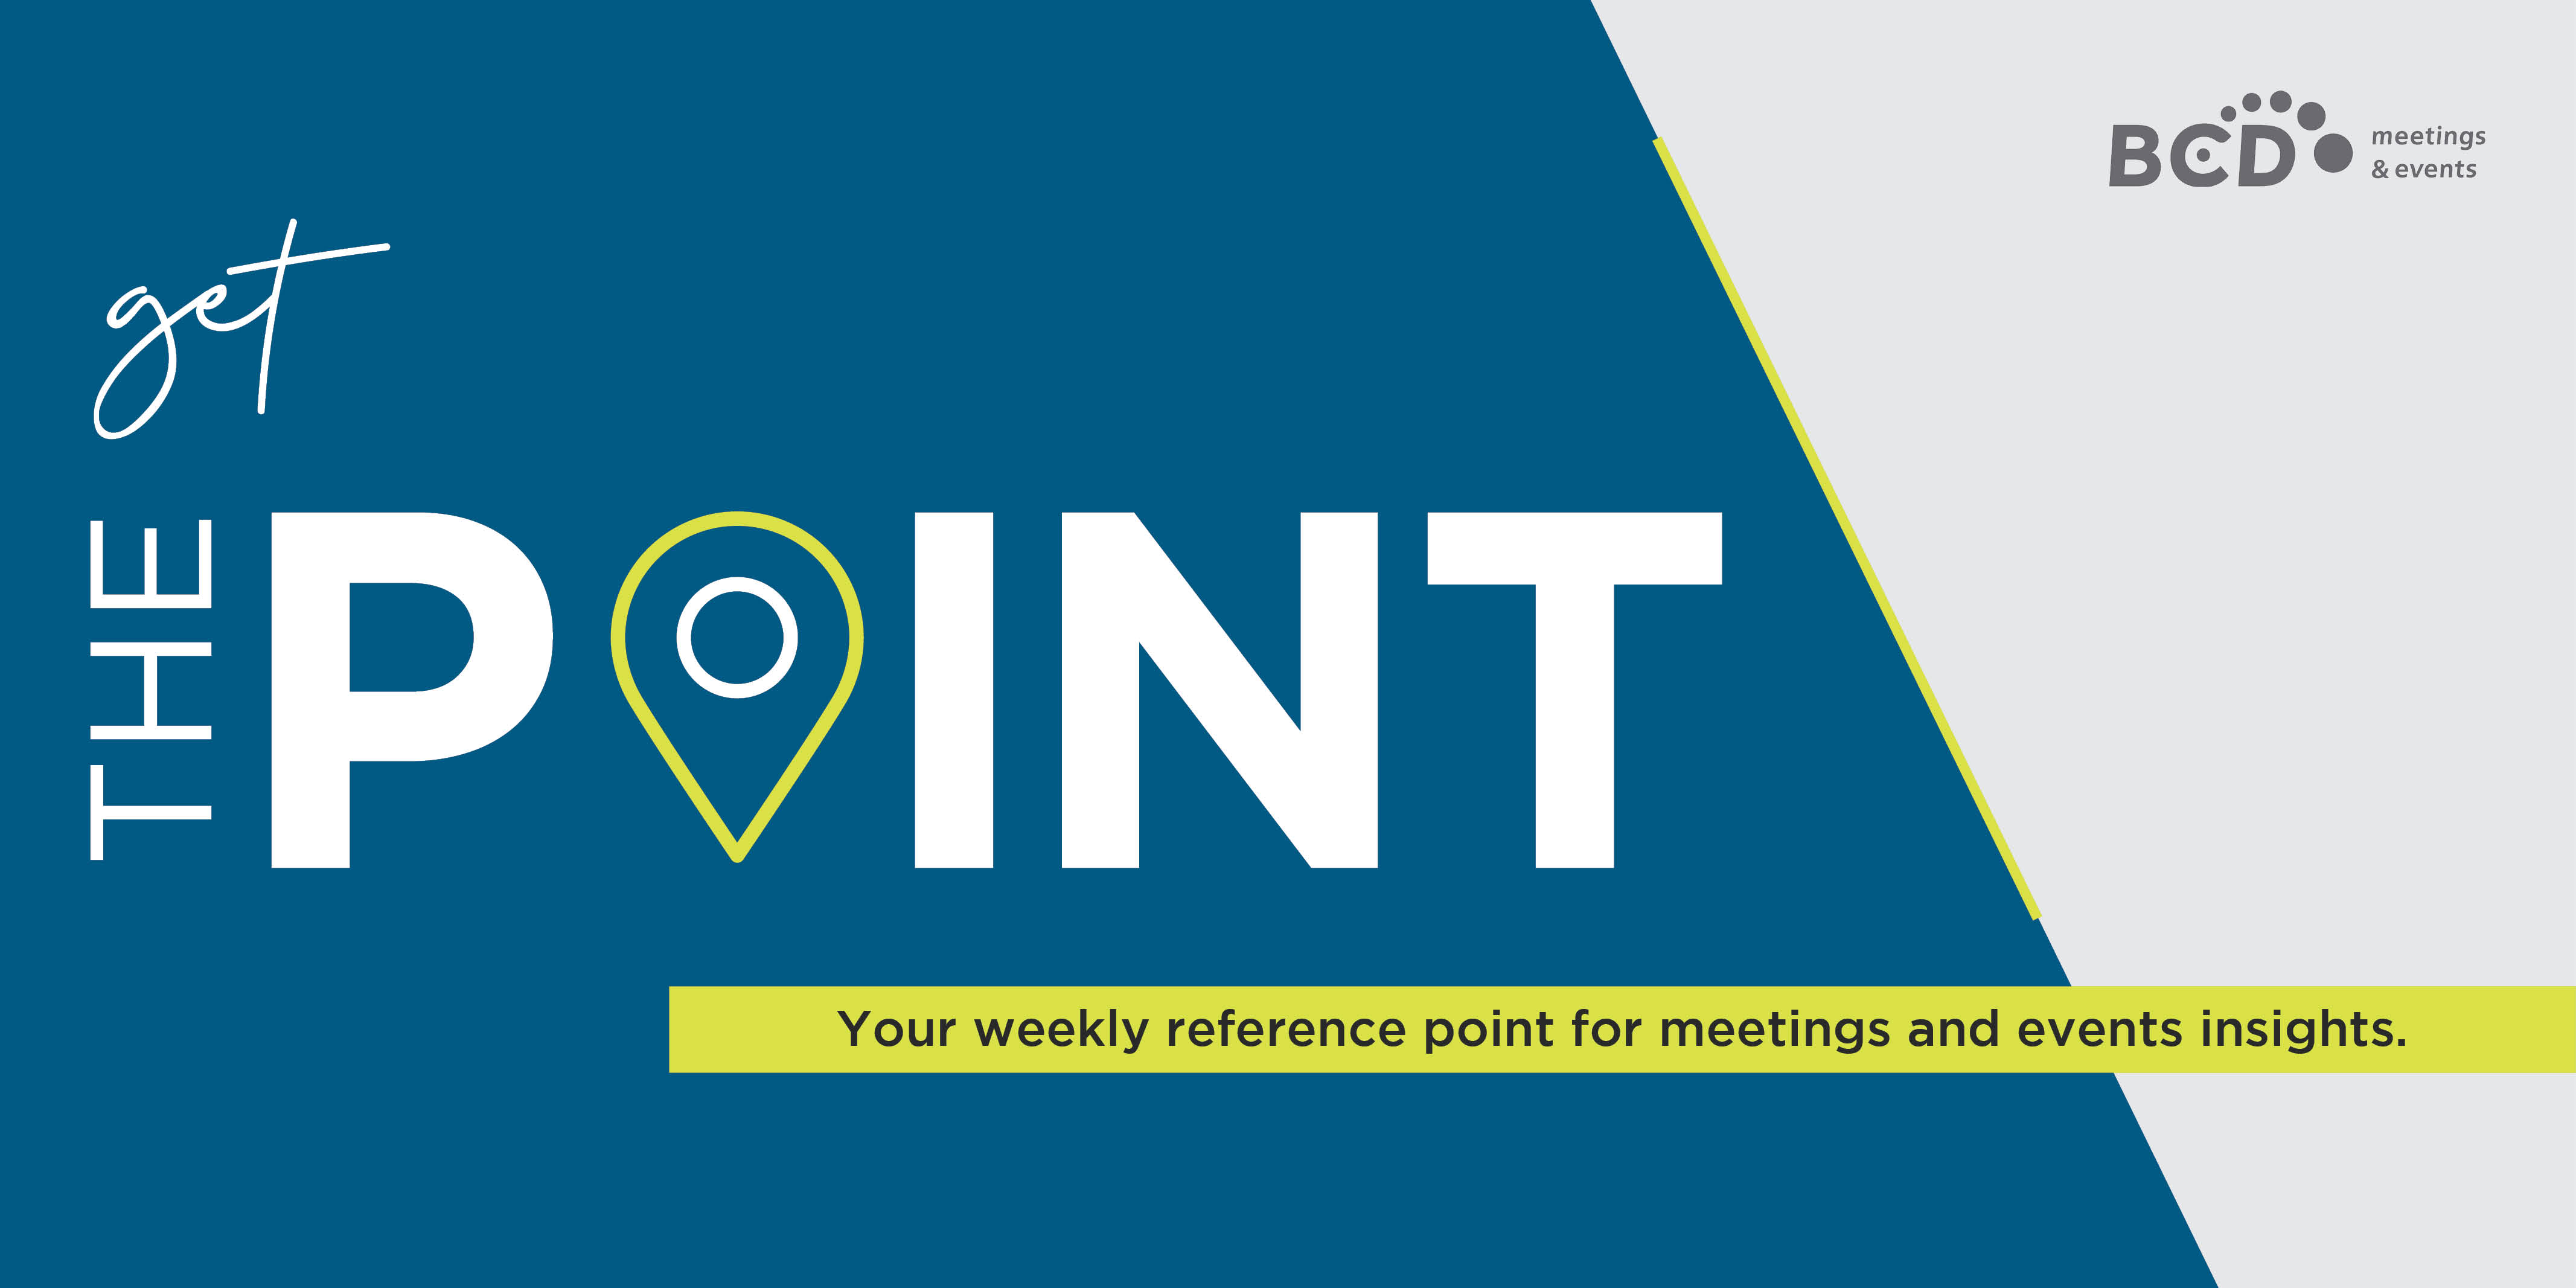 The Point by BCD M&E, a newsletter for meetings & events | Global Agency BCD Meetings & Events